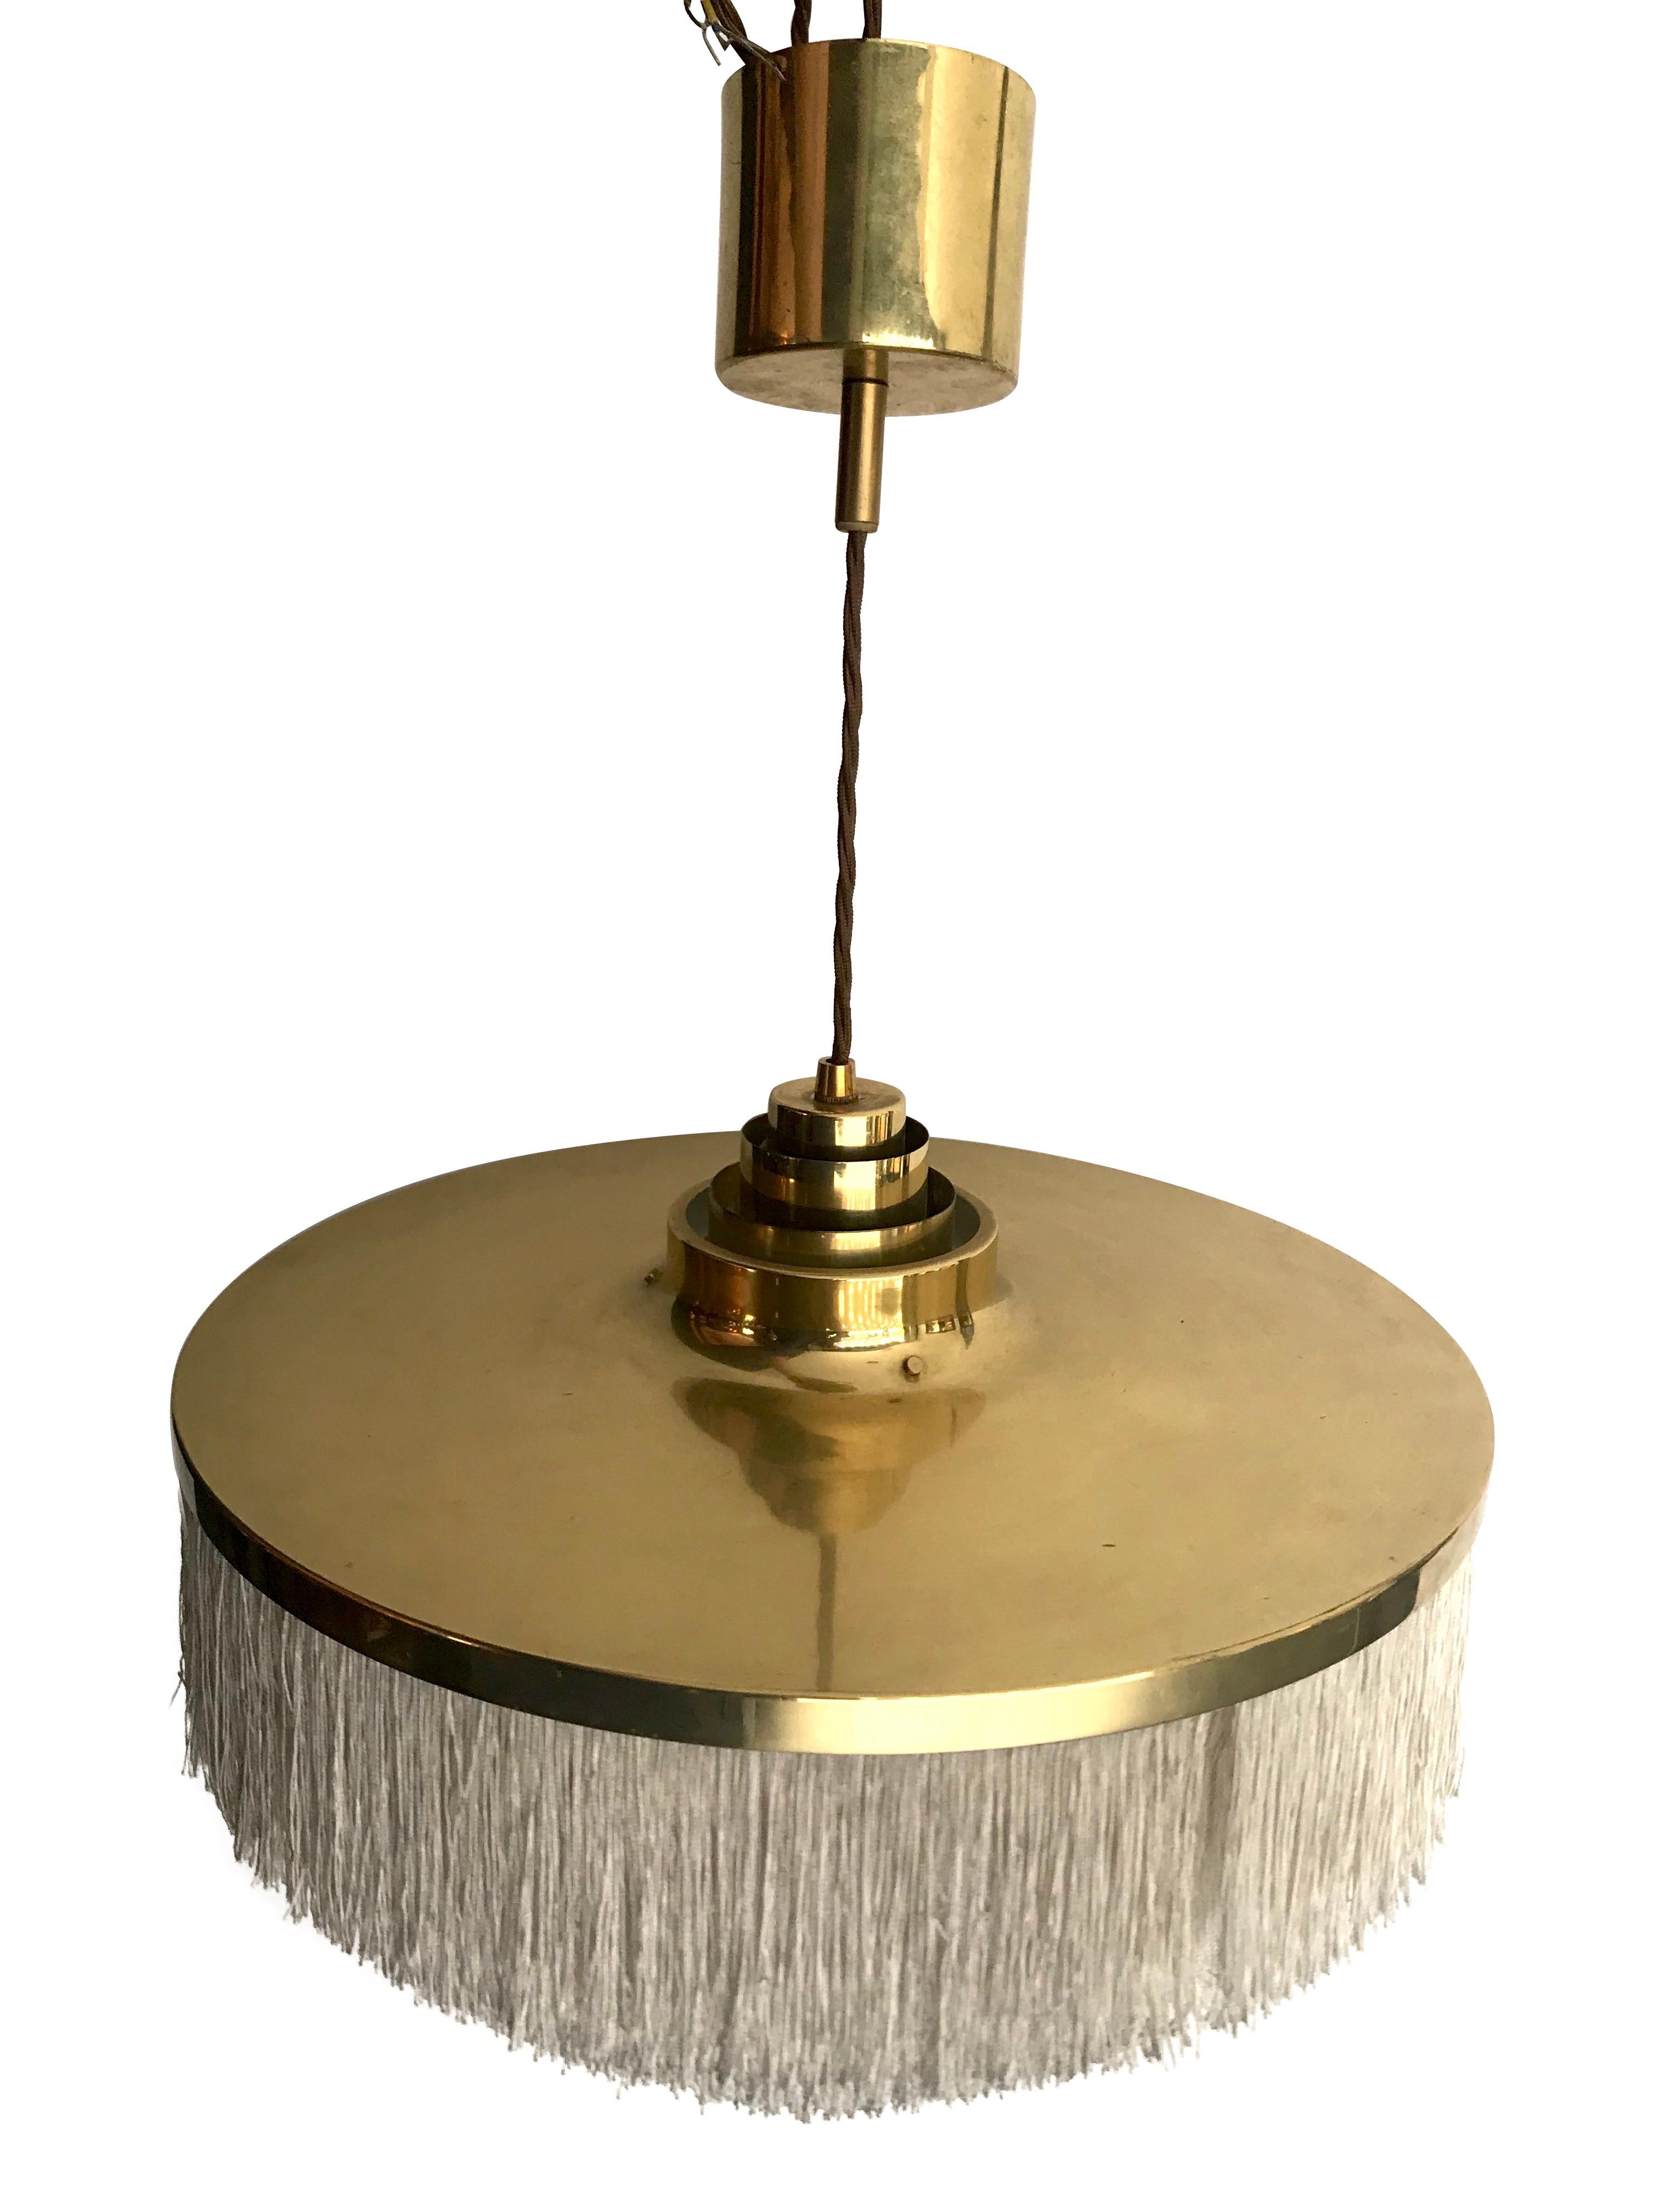 A Hans-Agne Jakobsson fringed pendant light, model T-603 for AB Markaryd, Sweden. The light has five tiers of ivory silk fringing suspended from the brass top shade, with brass ceiling mount.
Re wired with antique gold cord flex. Dimensions listed